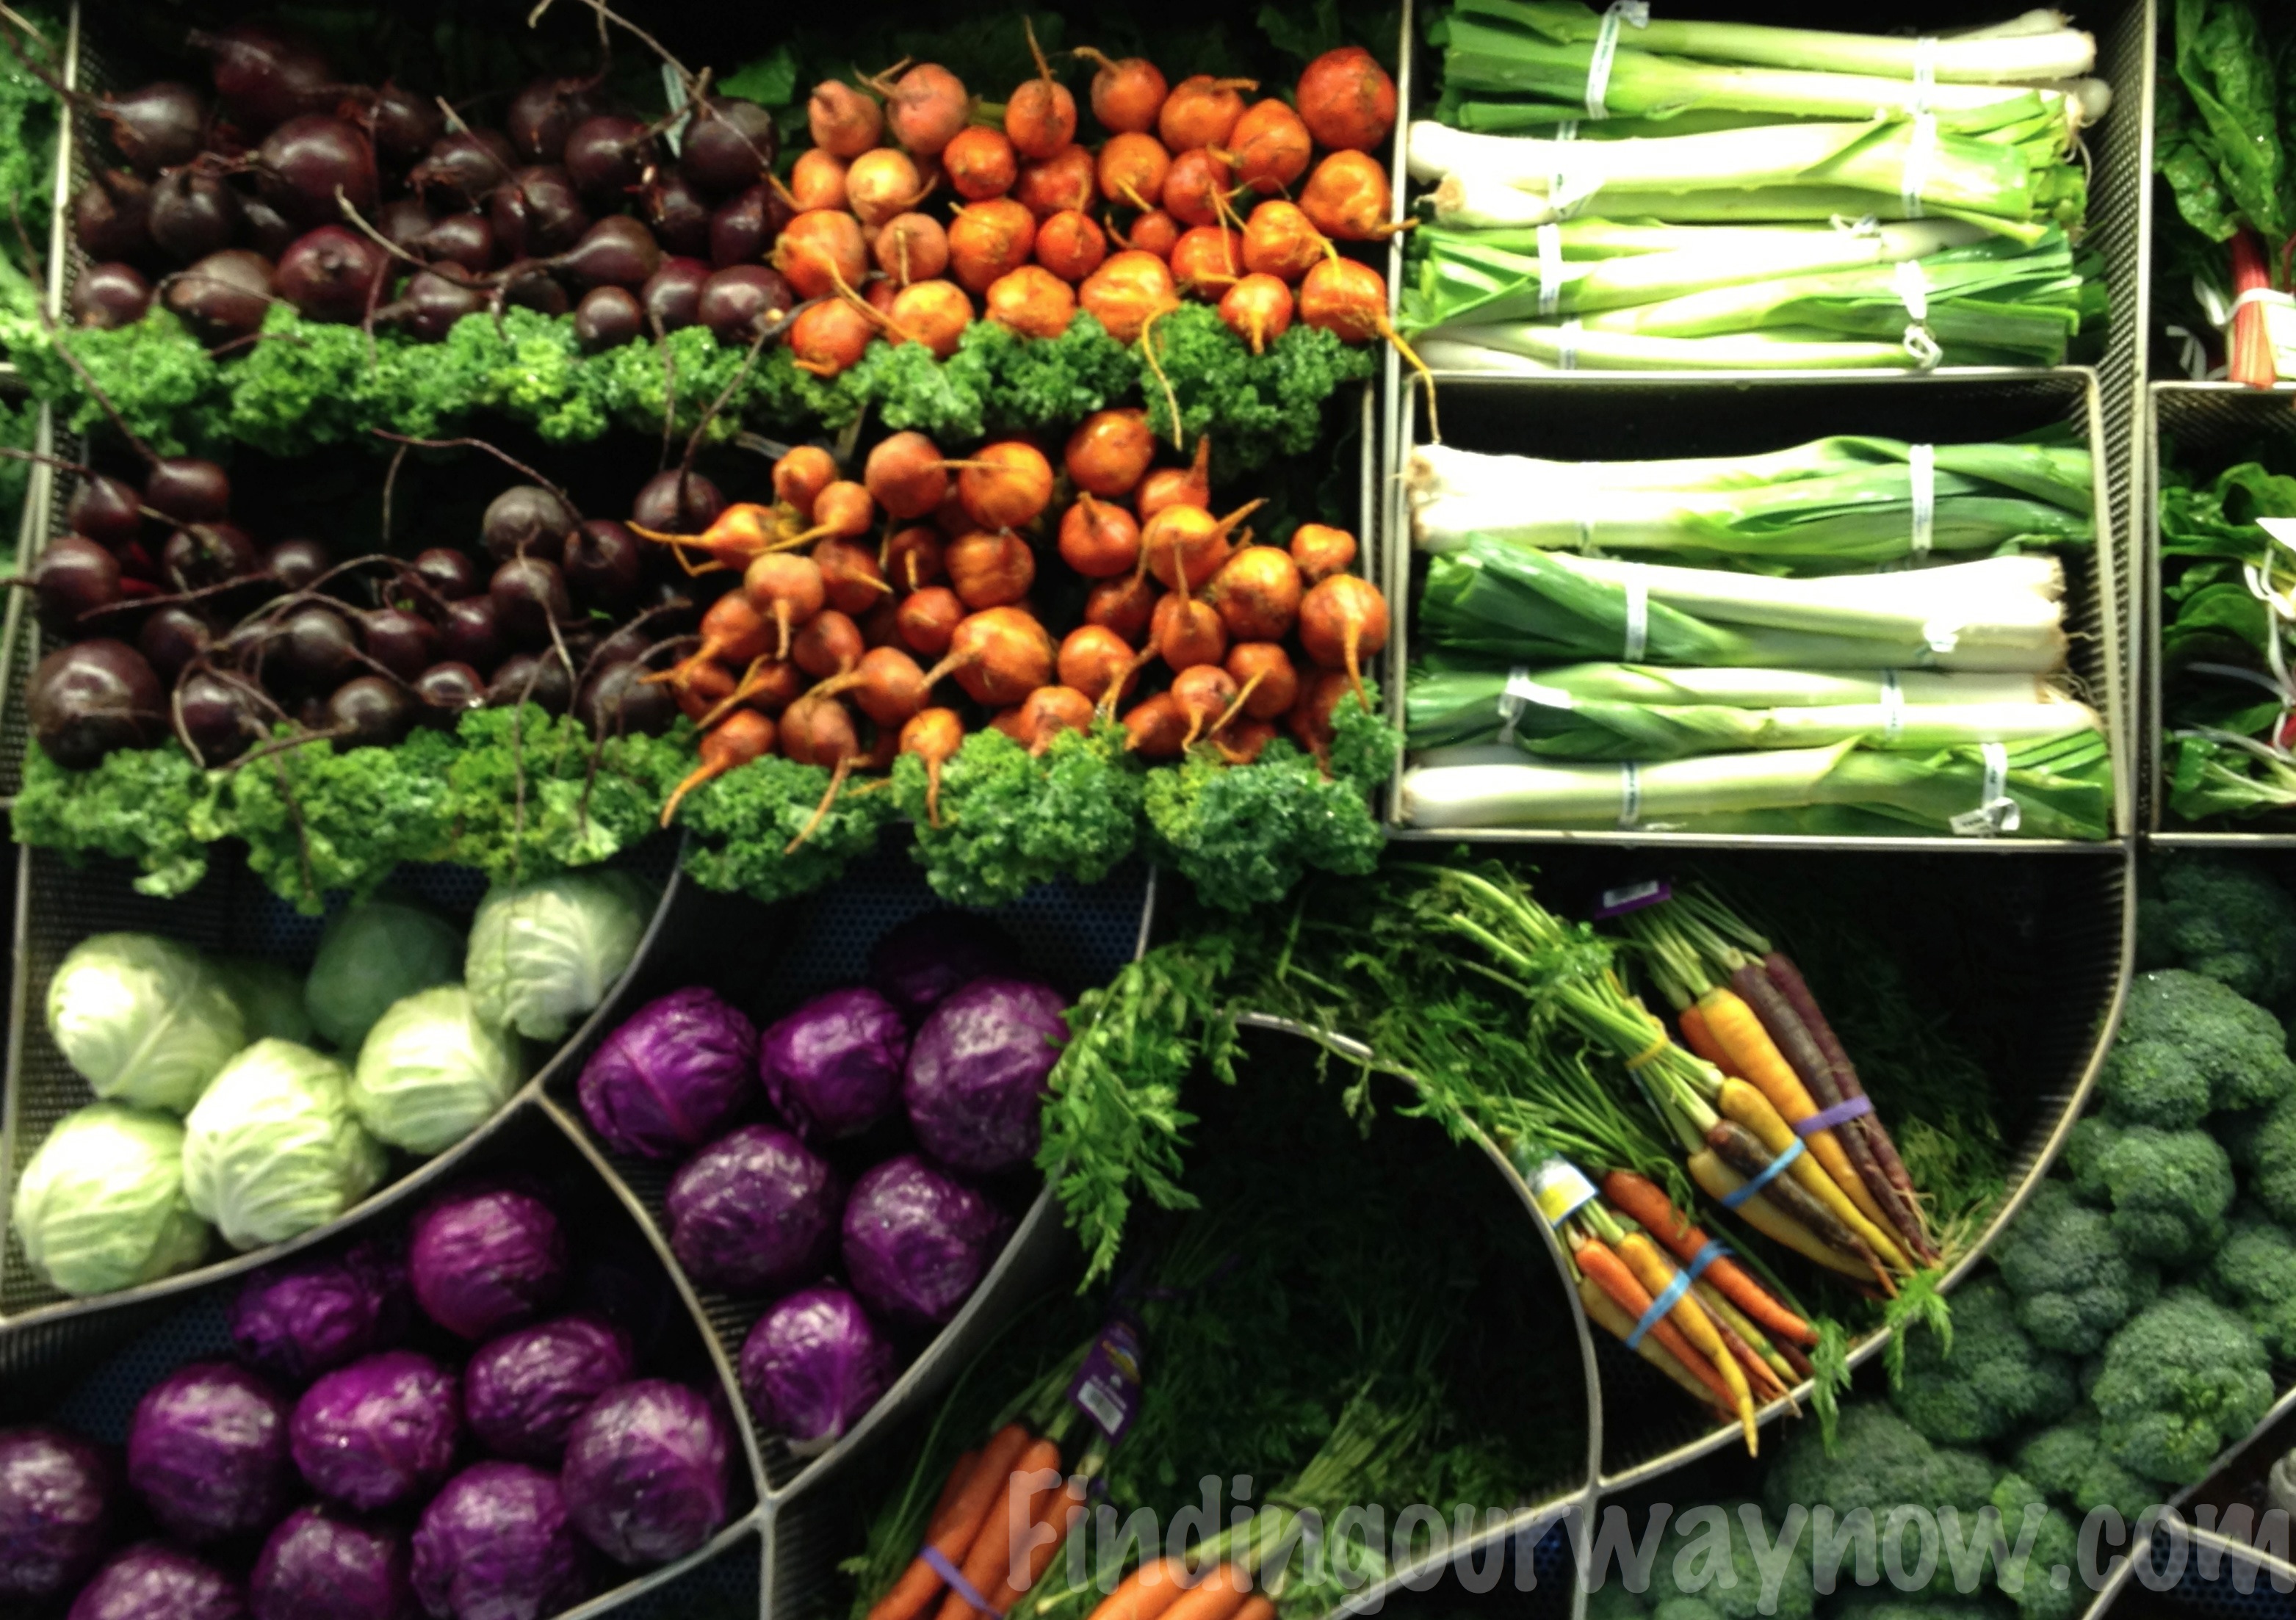 How Organic Food Reaches Your Local Market - Finding Our Way Now